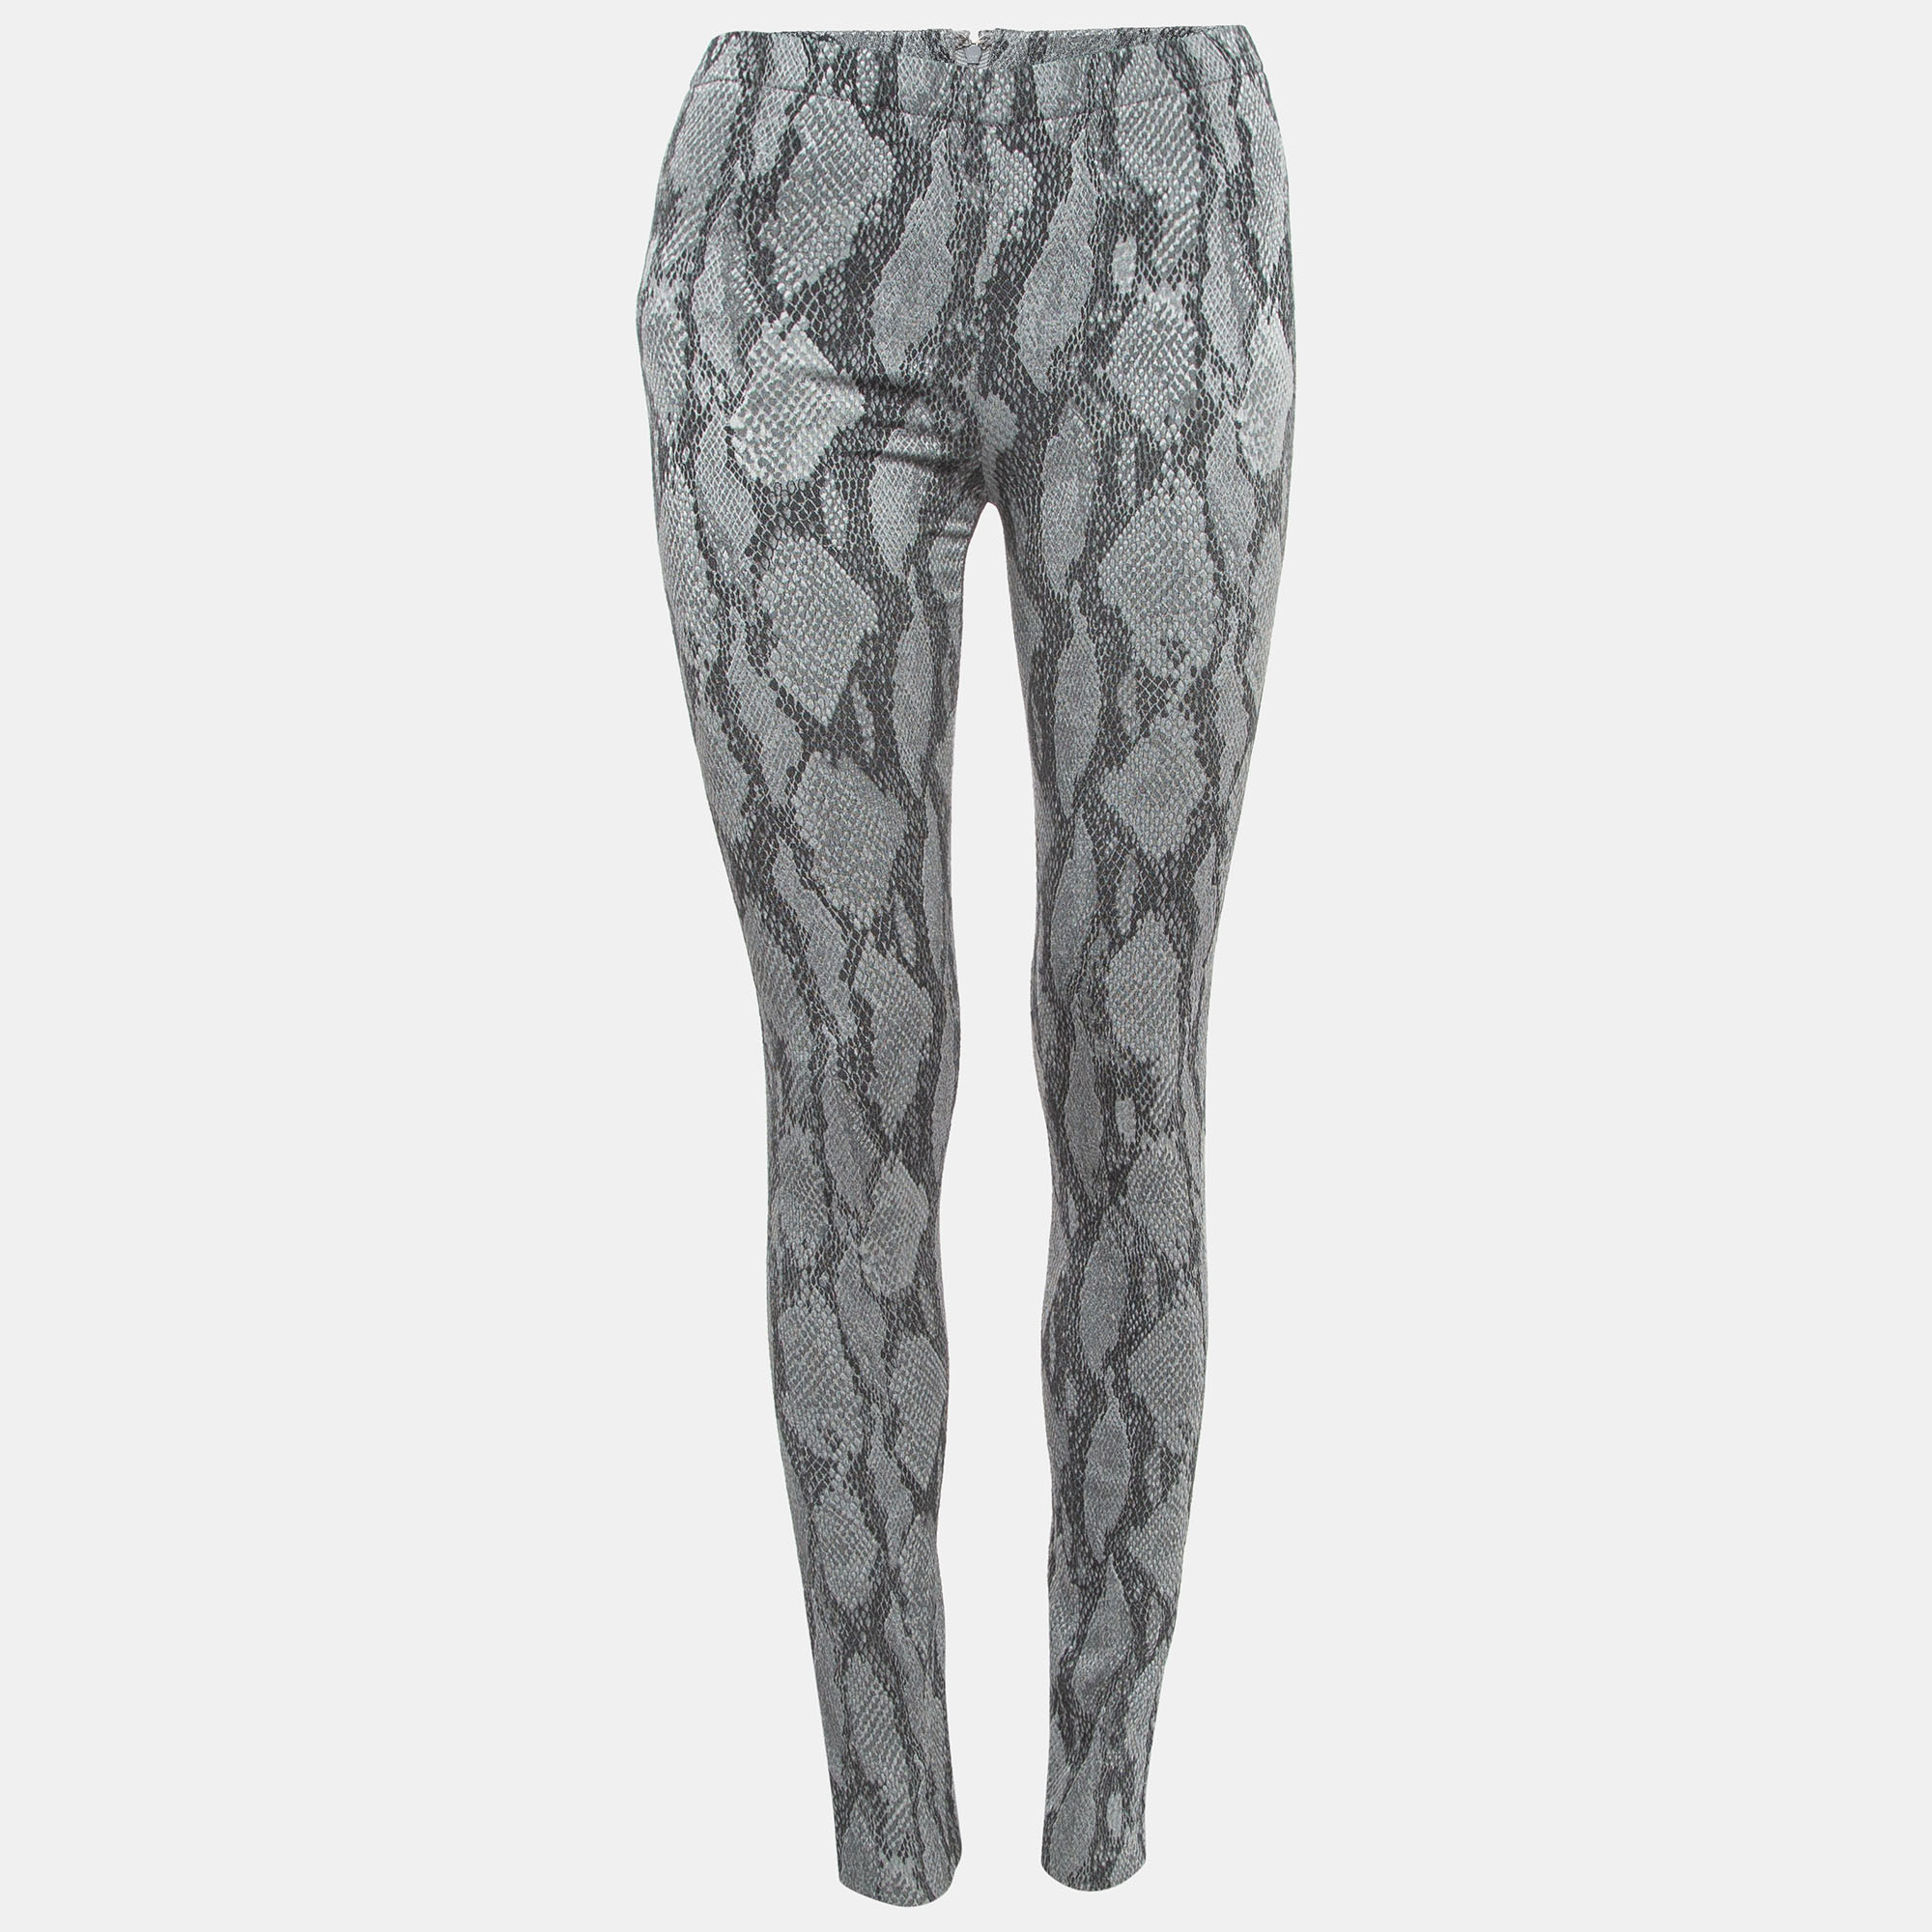 Pre-owned Zadig & Voltaire Grey Snake Printed Textured Knit Leggings M